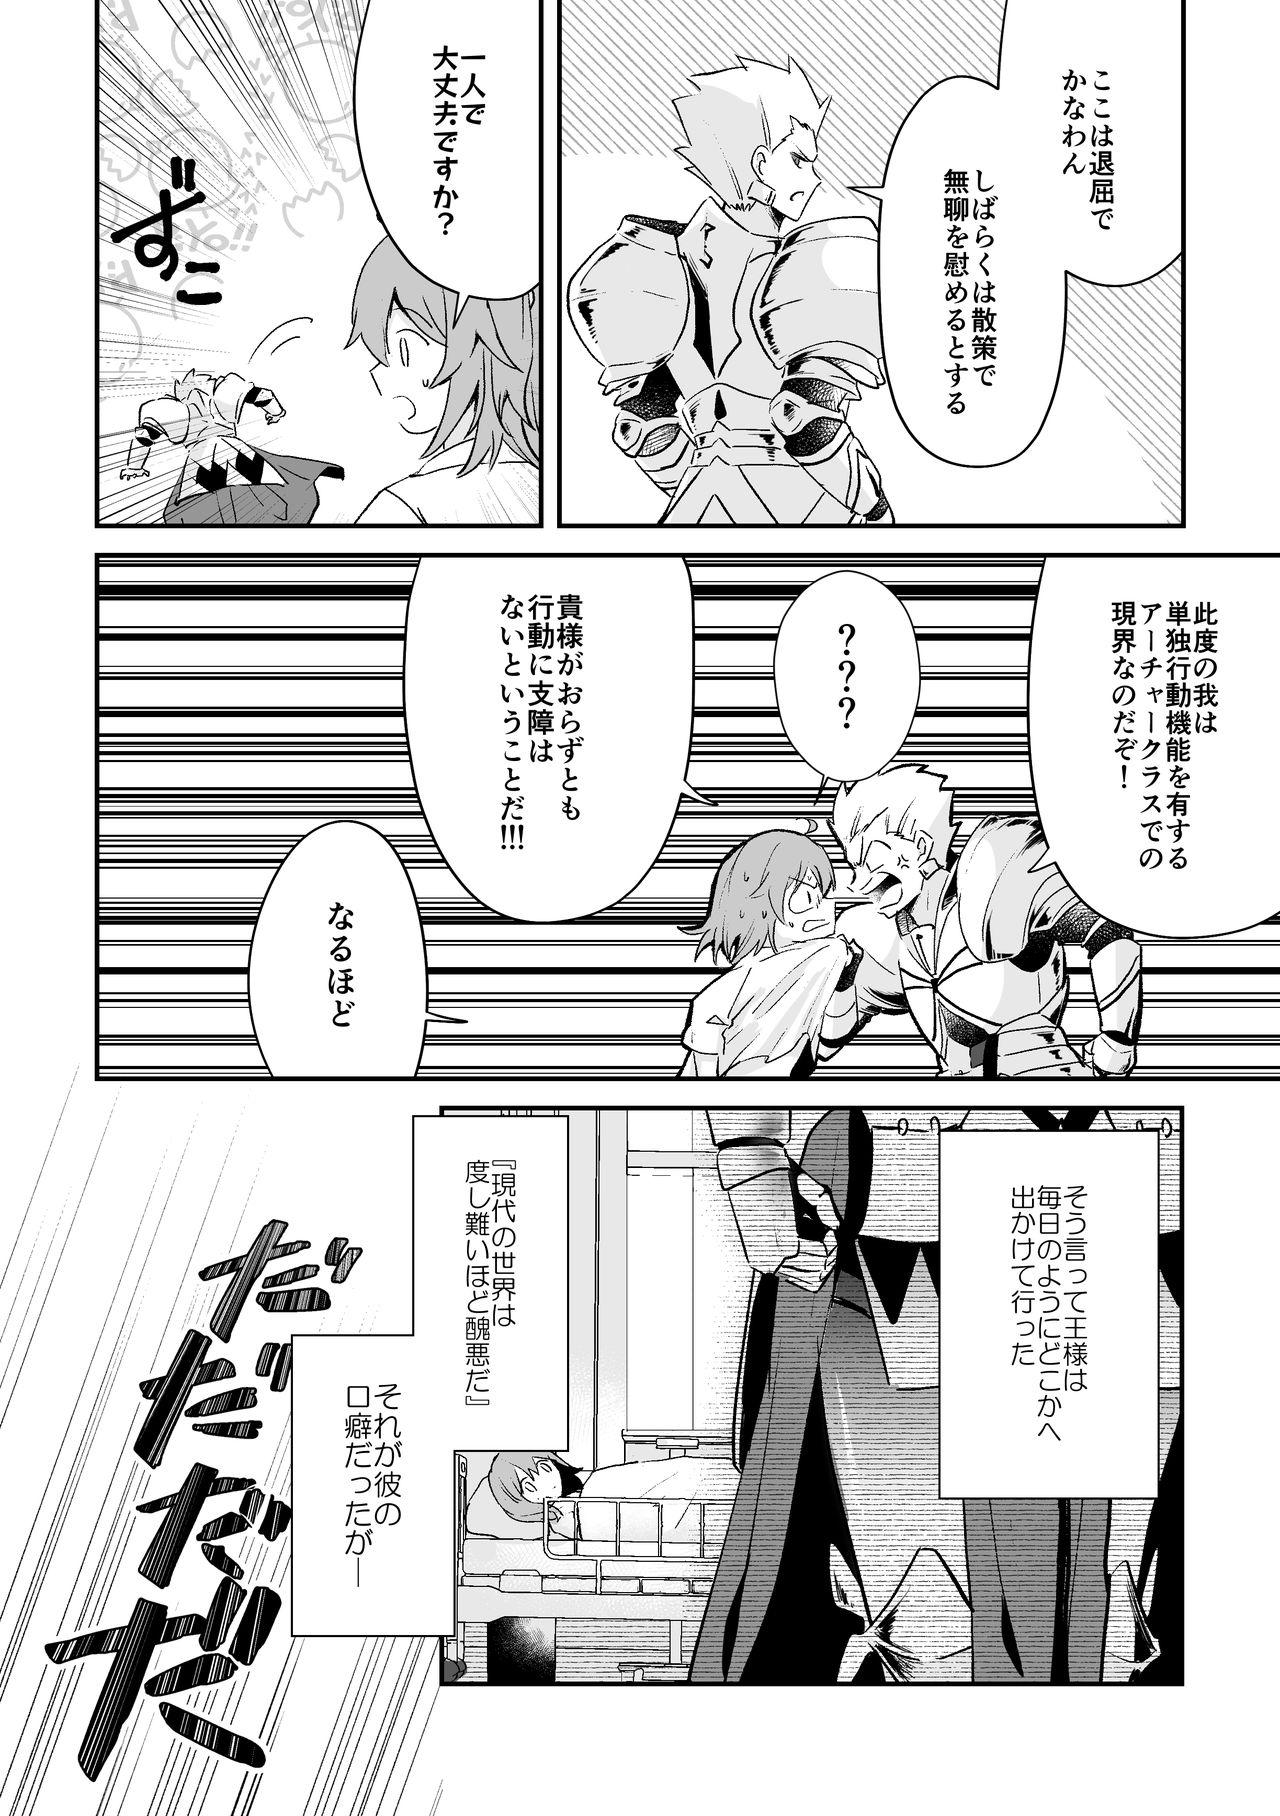 Tight Pussy Yomei Ichinen no Master 2 - Fate grand order Les - Page 2